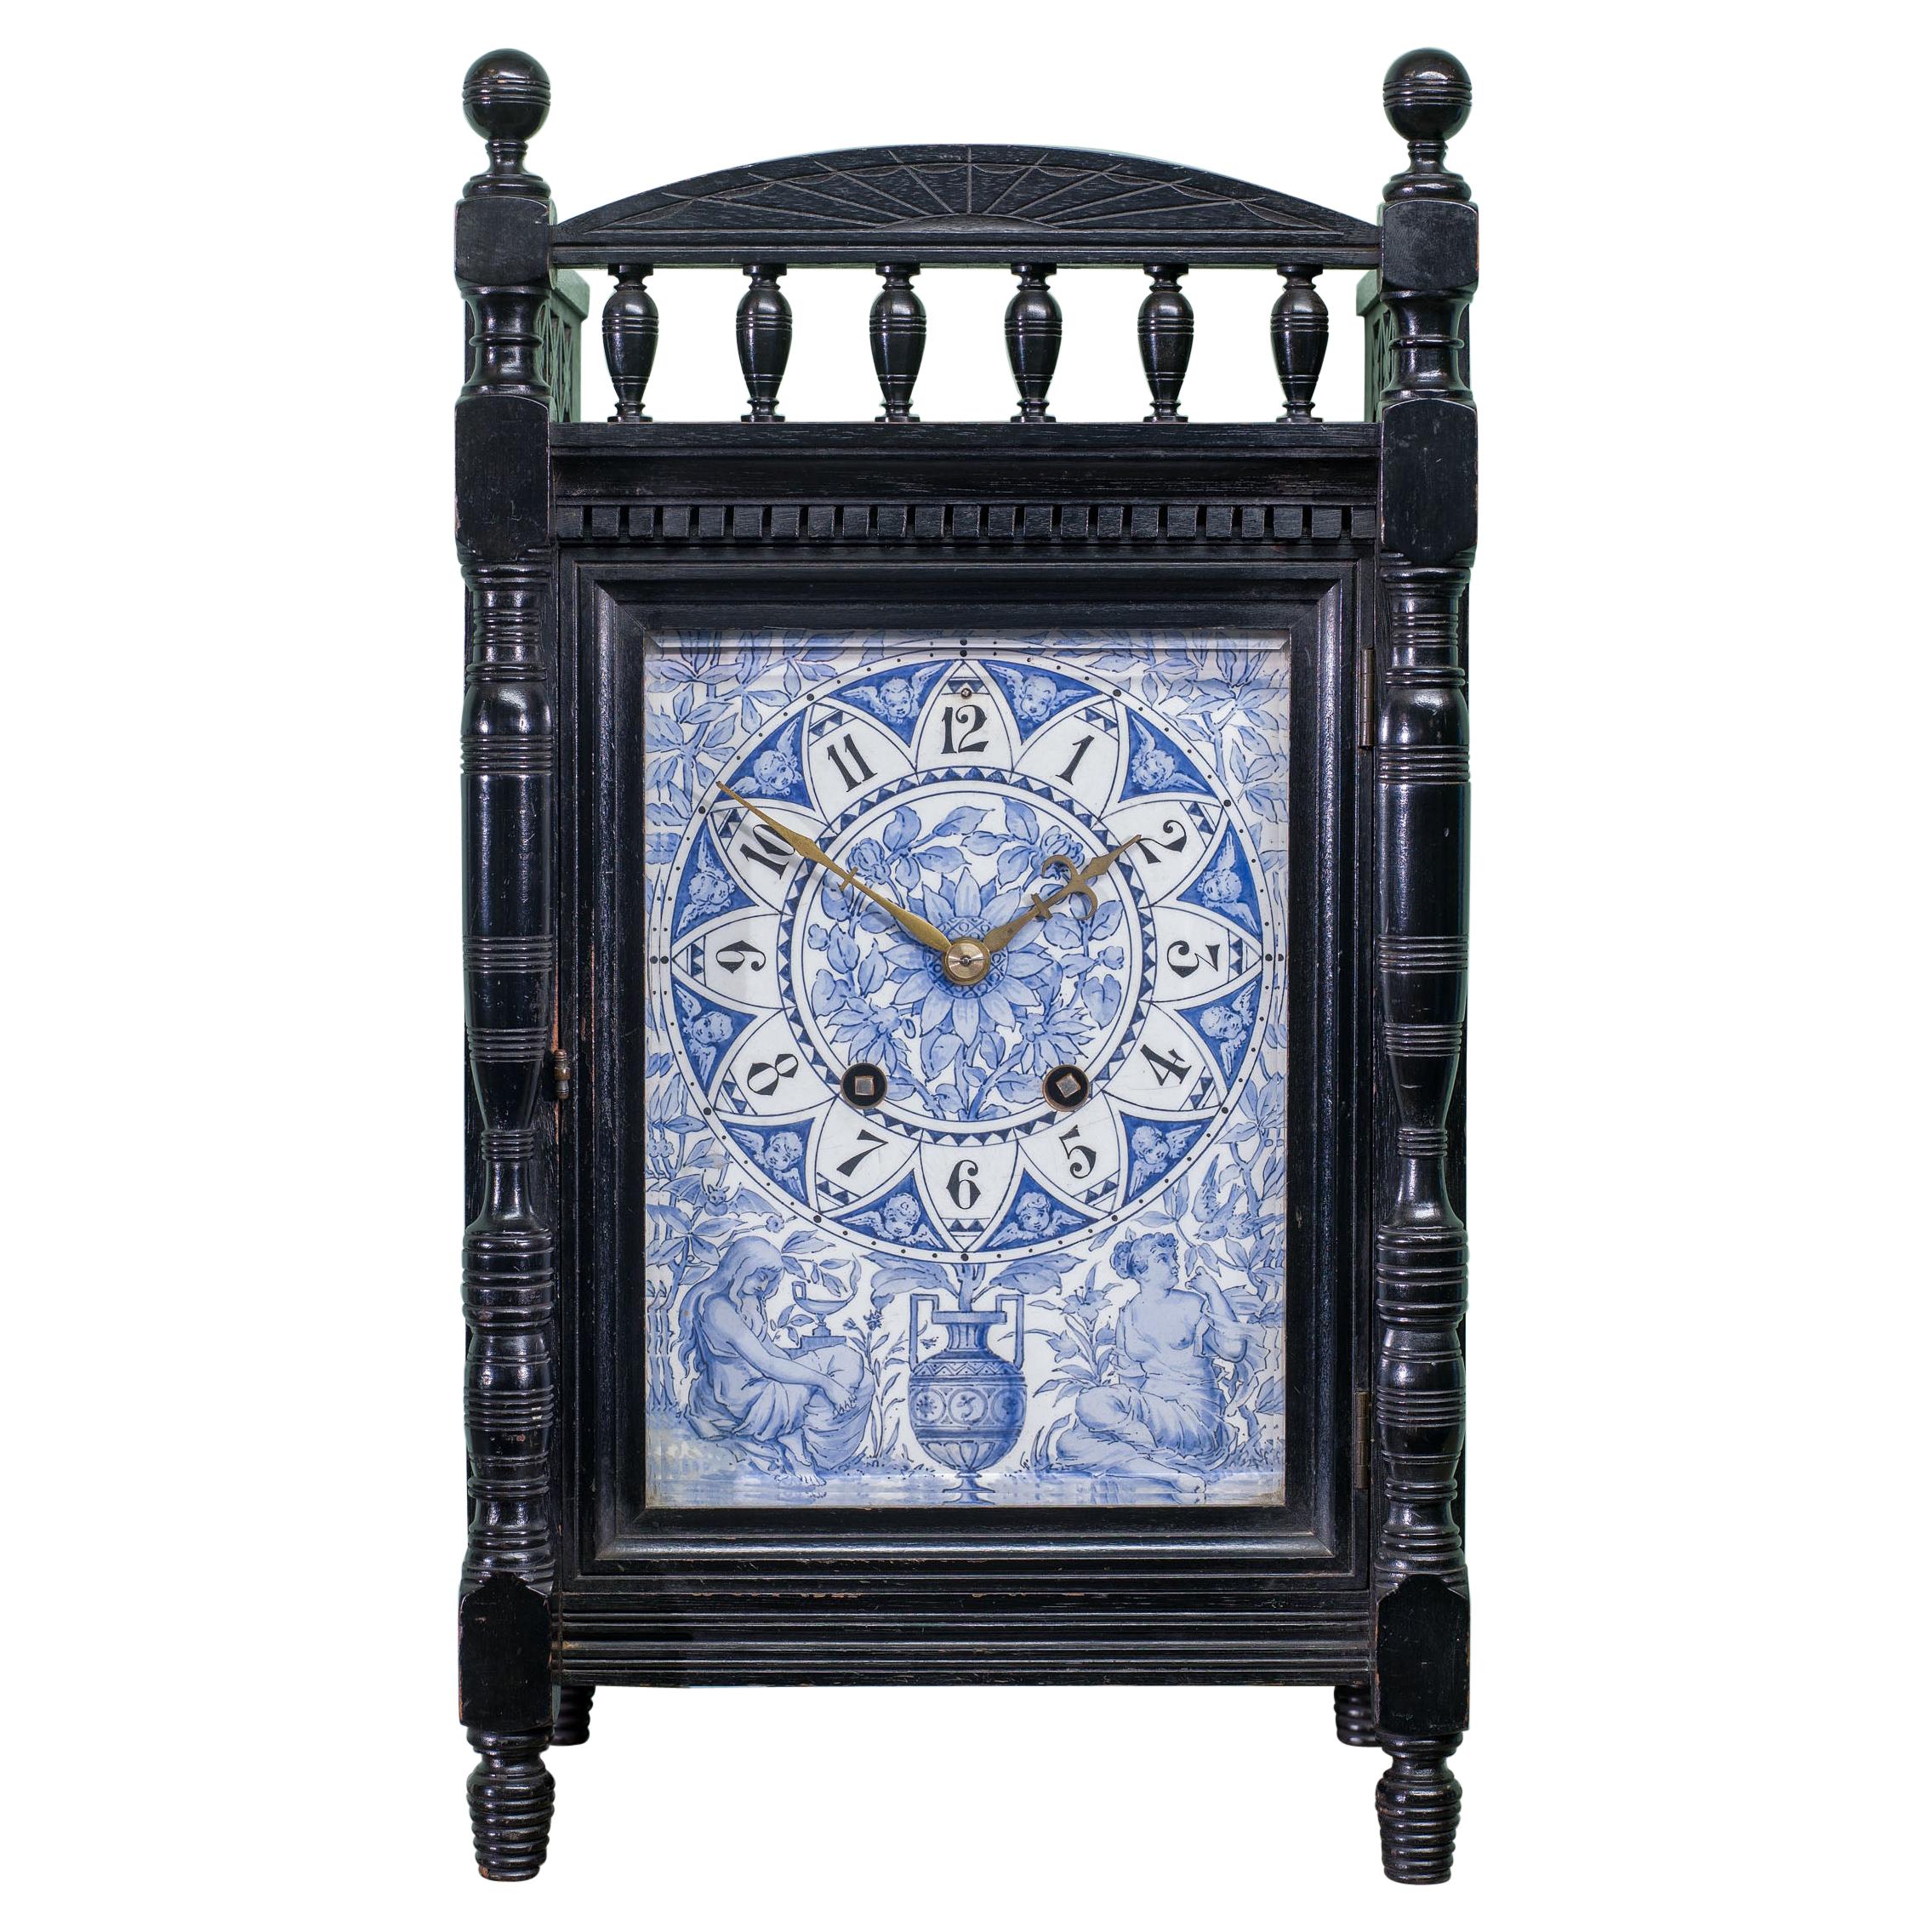 Aesthetic Movement Ebonised Mantel Clock Attributed to Lewis Foreman Day